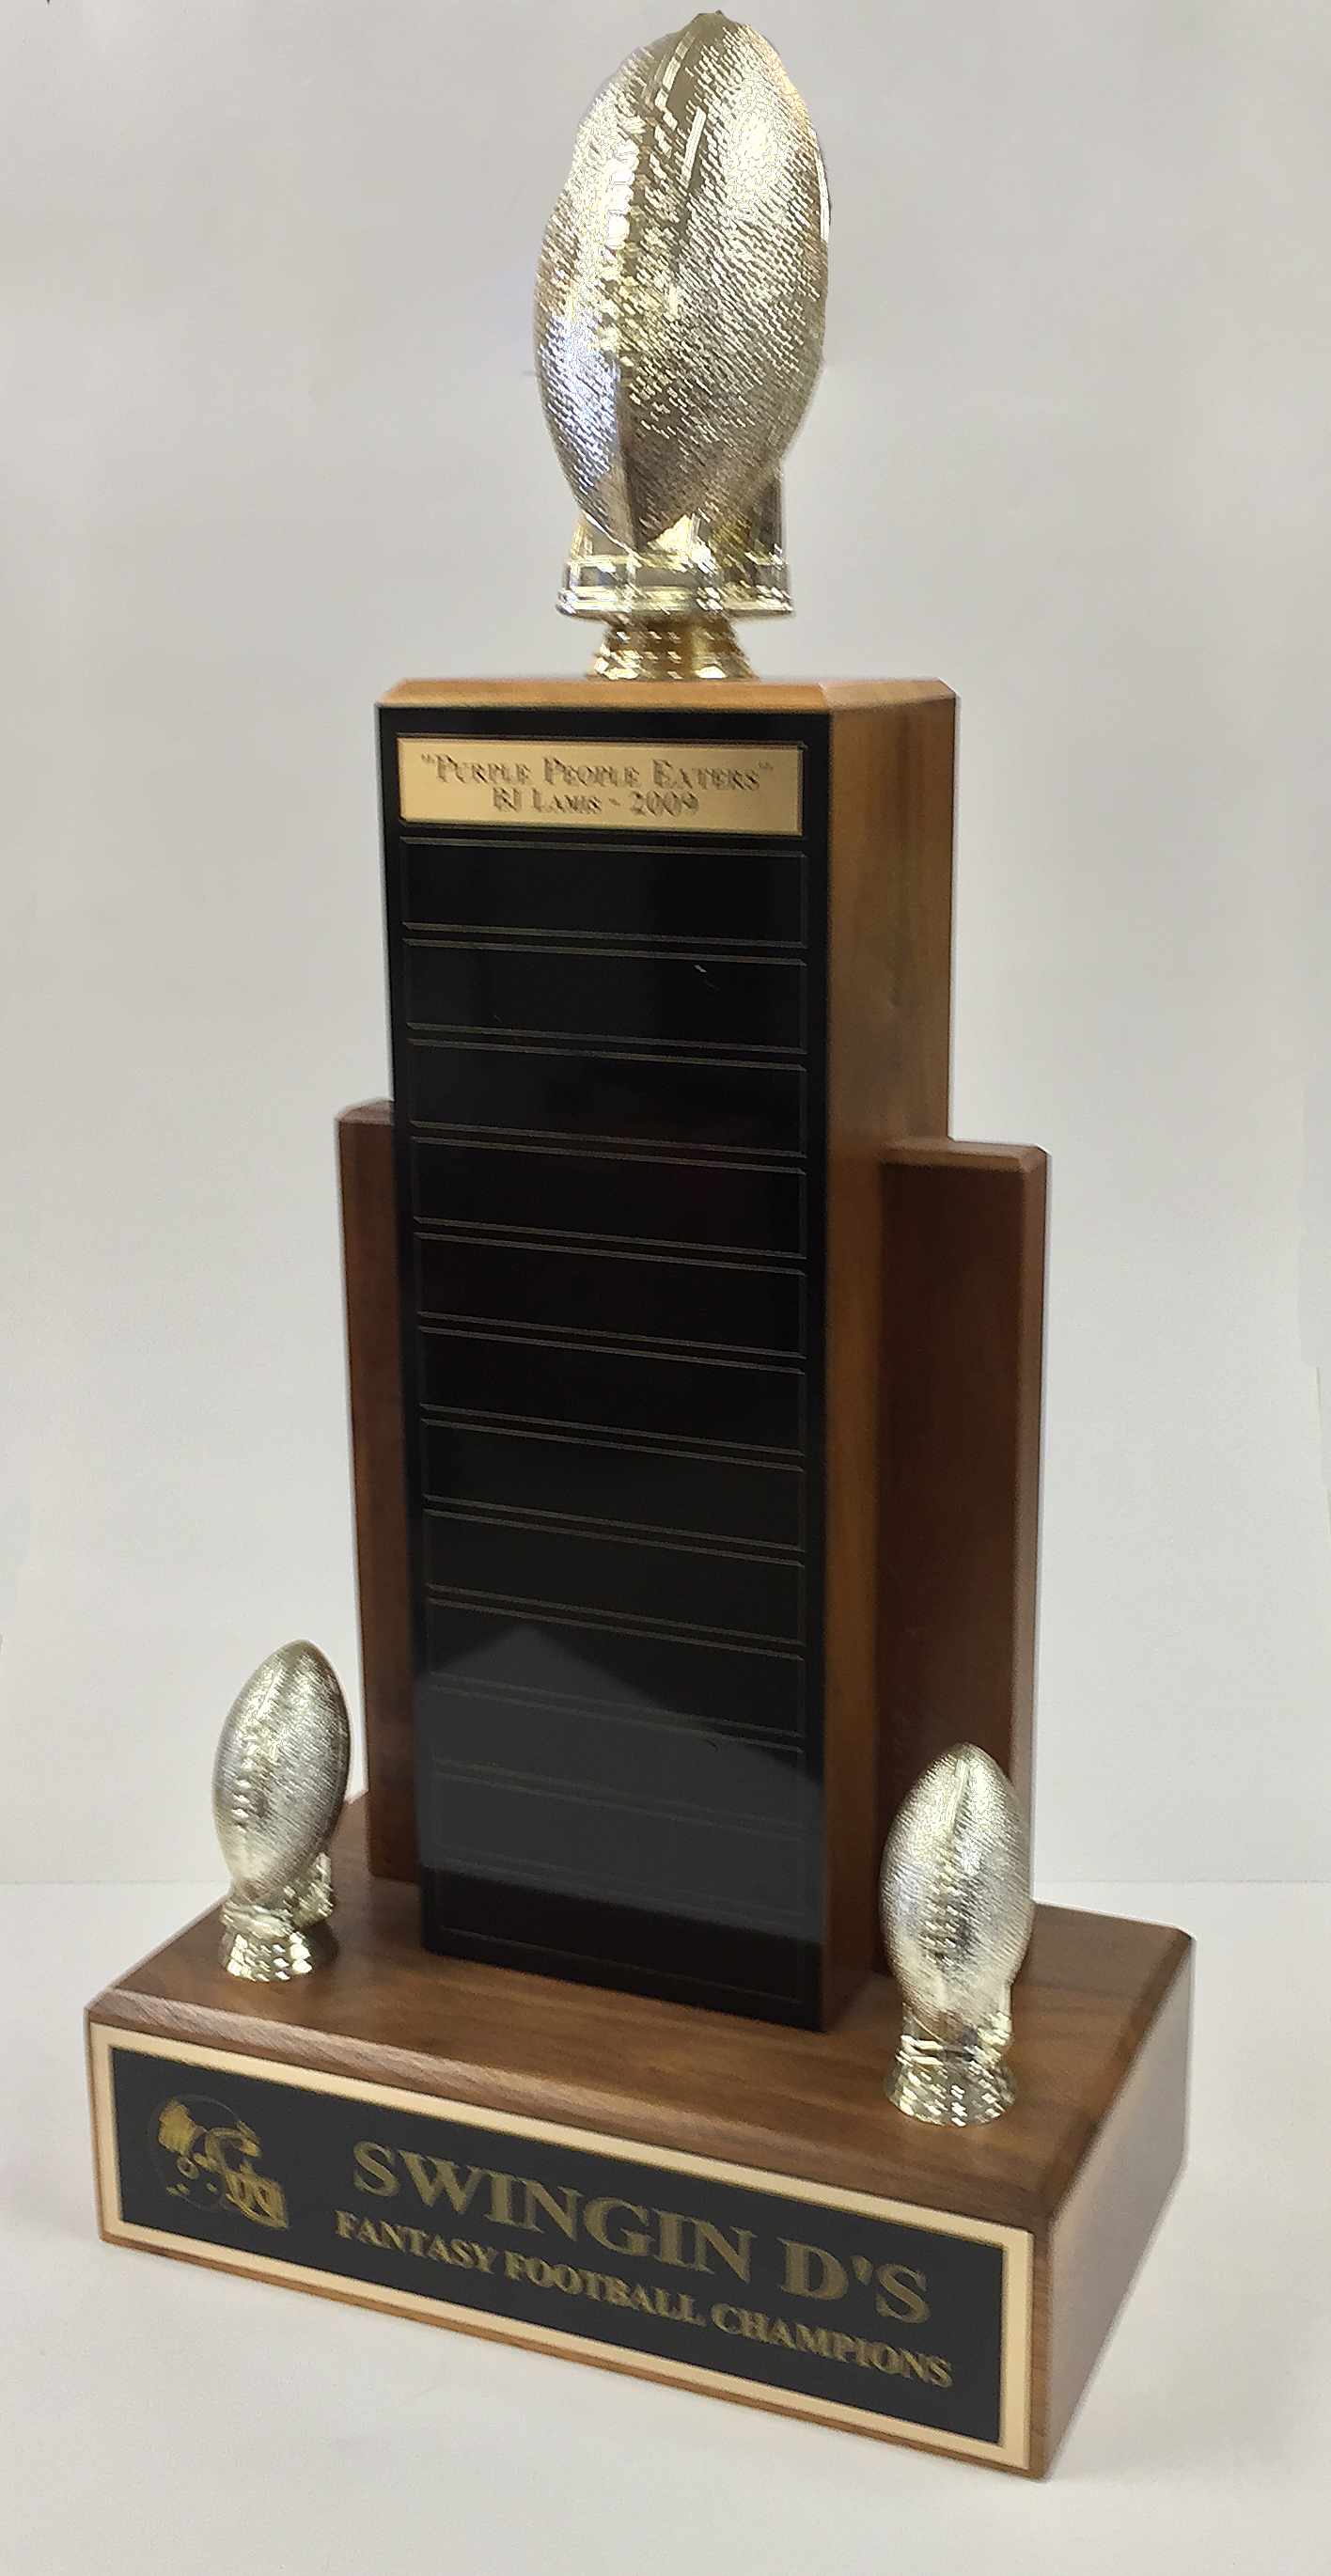 Solid Walnut Fantasy Football Trophy with Gold Resin Football Figures -  Best Trophies and Awards